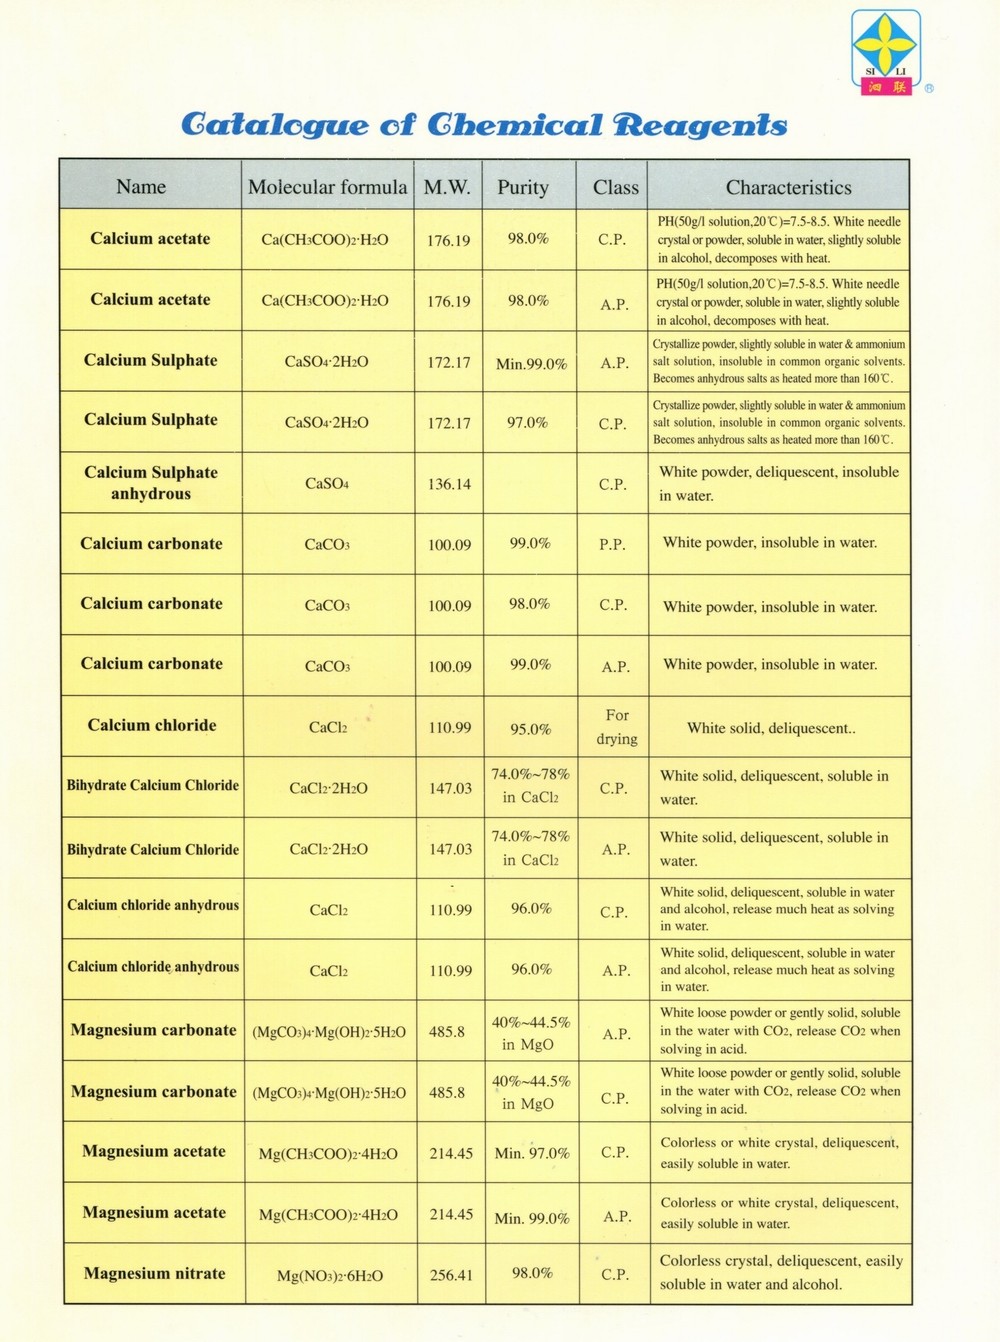 chemical reagents 1-a.jpg